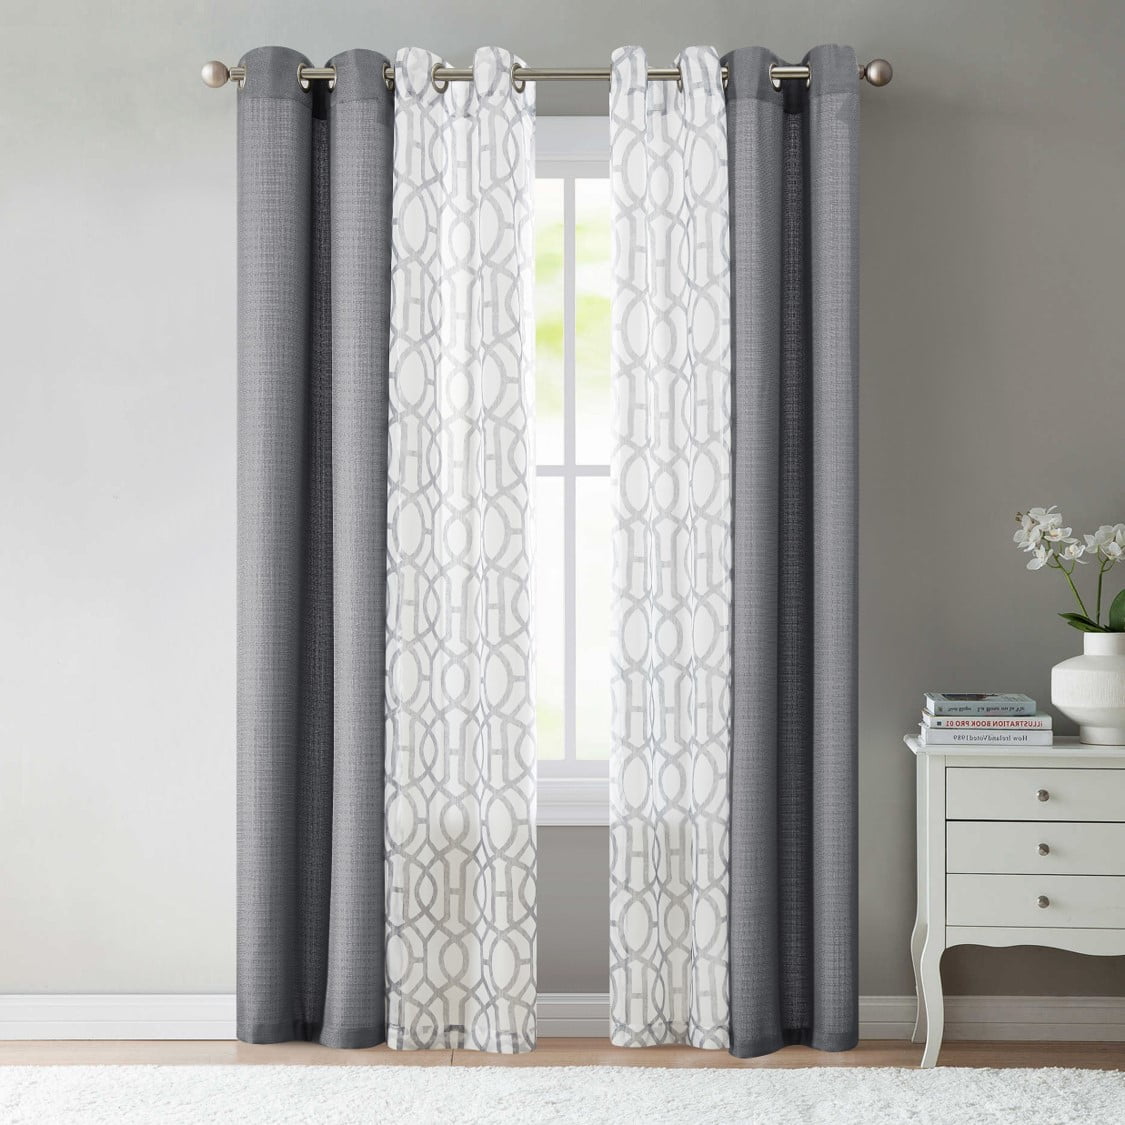 Mainstays Kingswood 4 Piece Curtain Set, All In One Window Curtain Sets